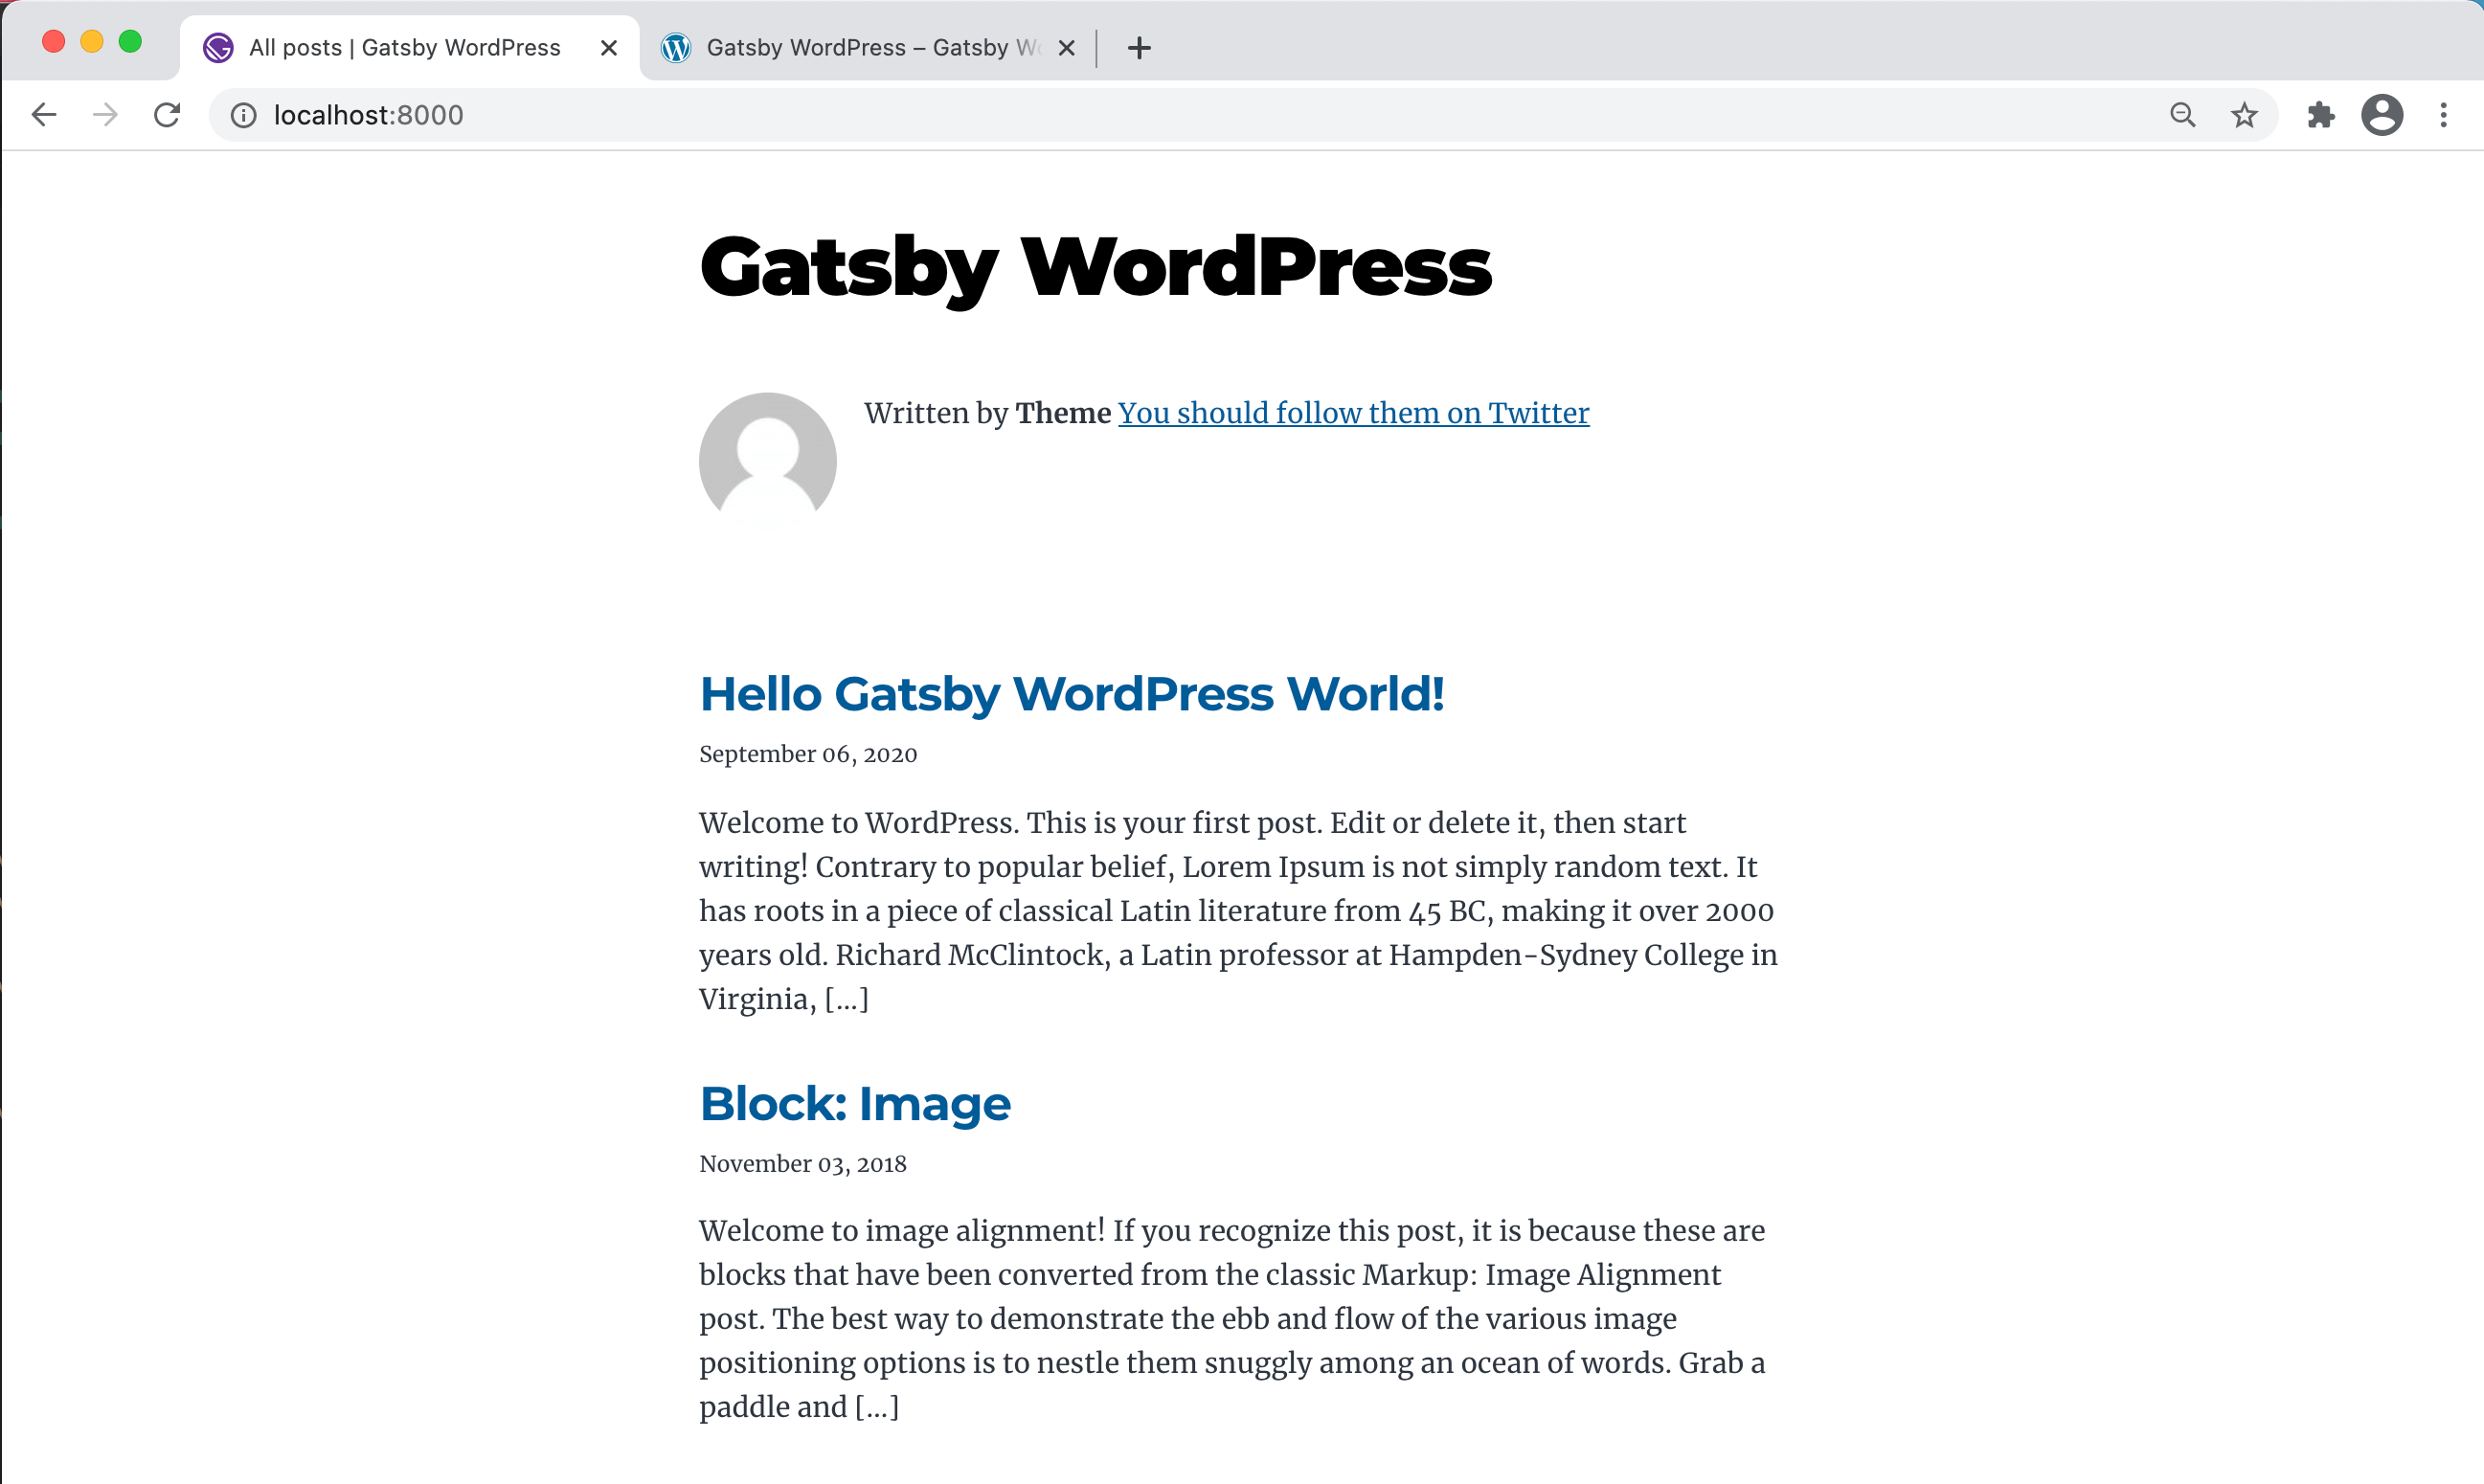 The homepage of our starting site, displaying posts pulled from WordPress data in a single column.